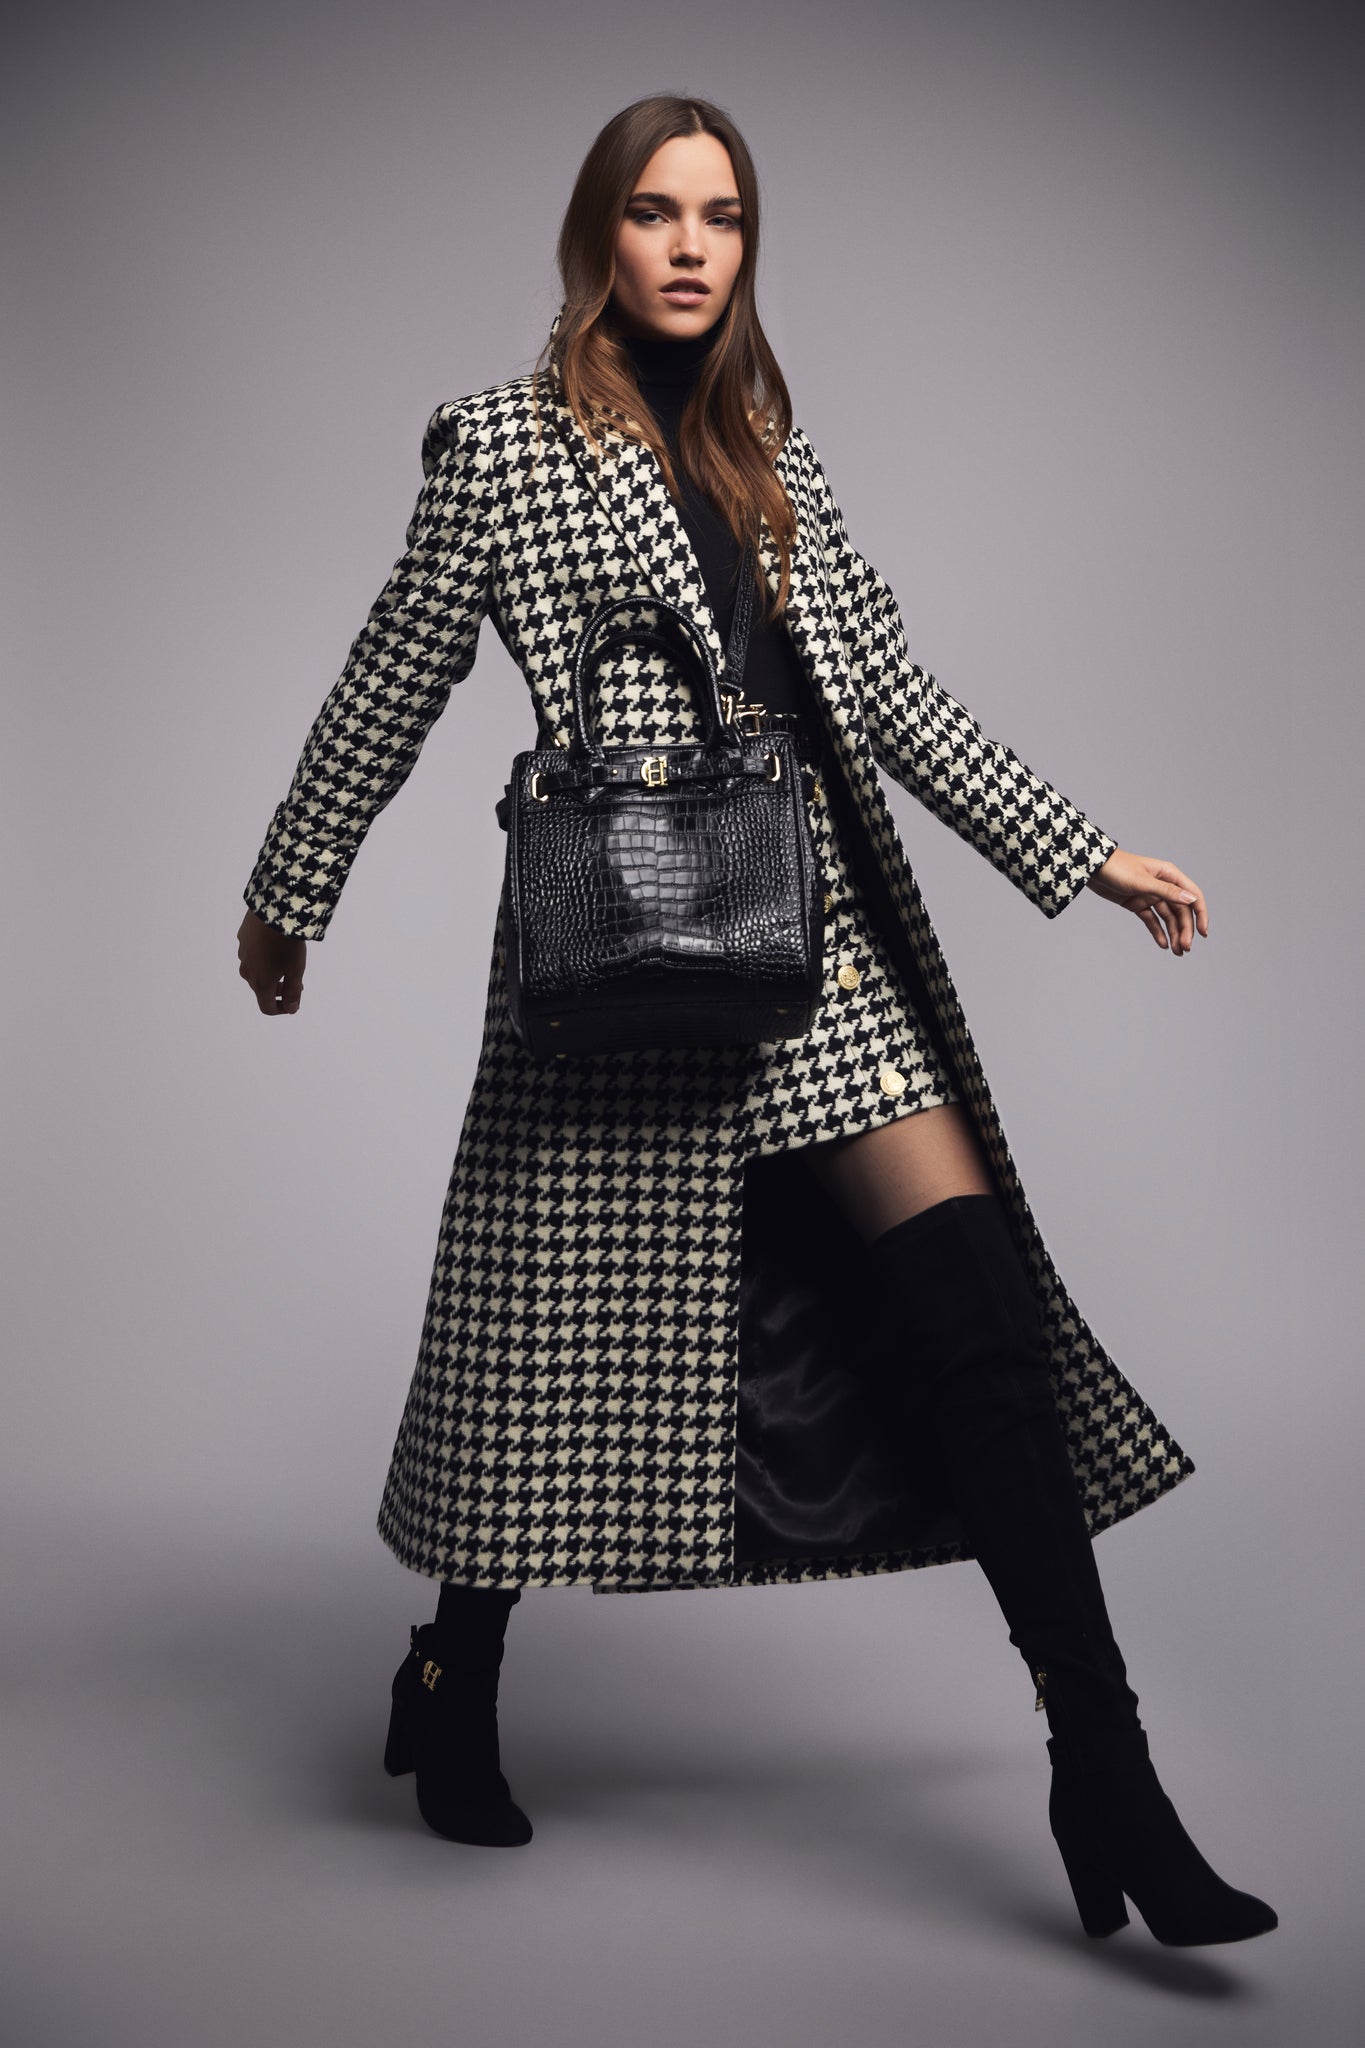 Womens black and white large houndstooth mid length wrap coat with tie belt and black croc embossed leather tote bag